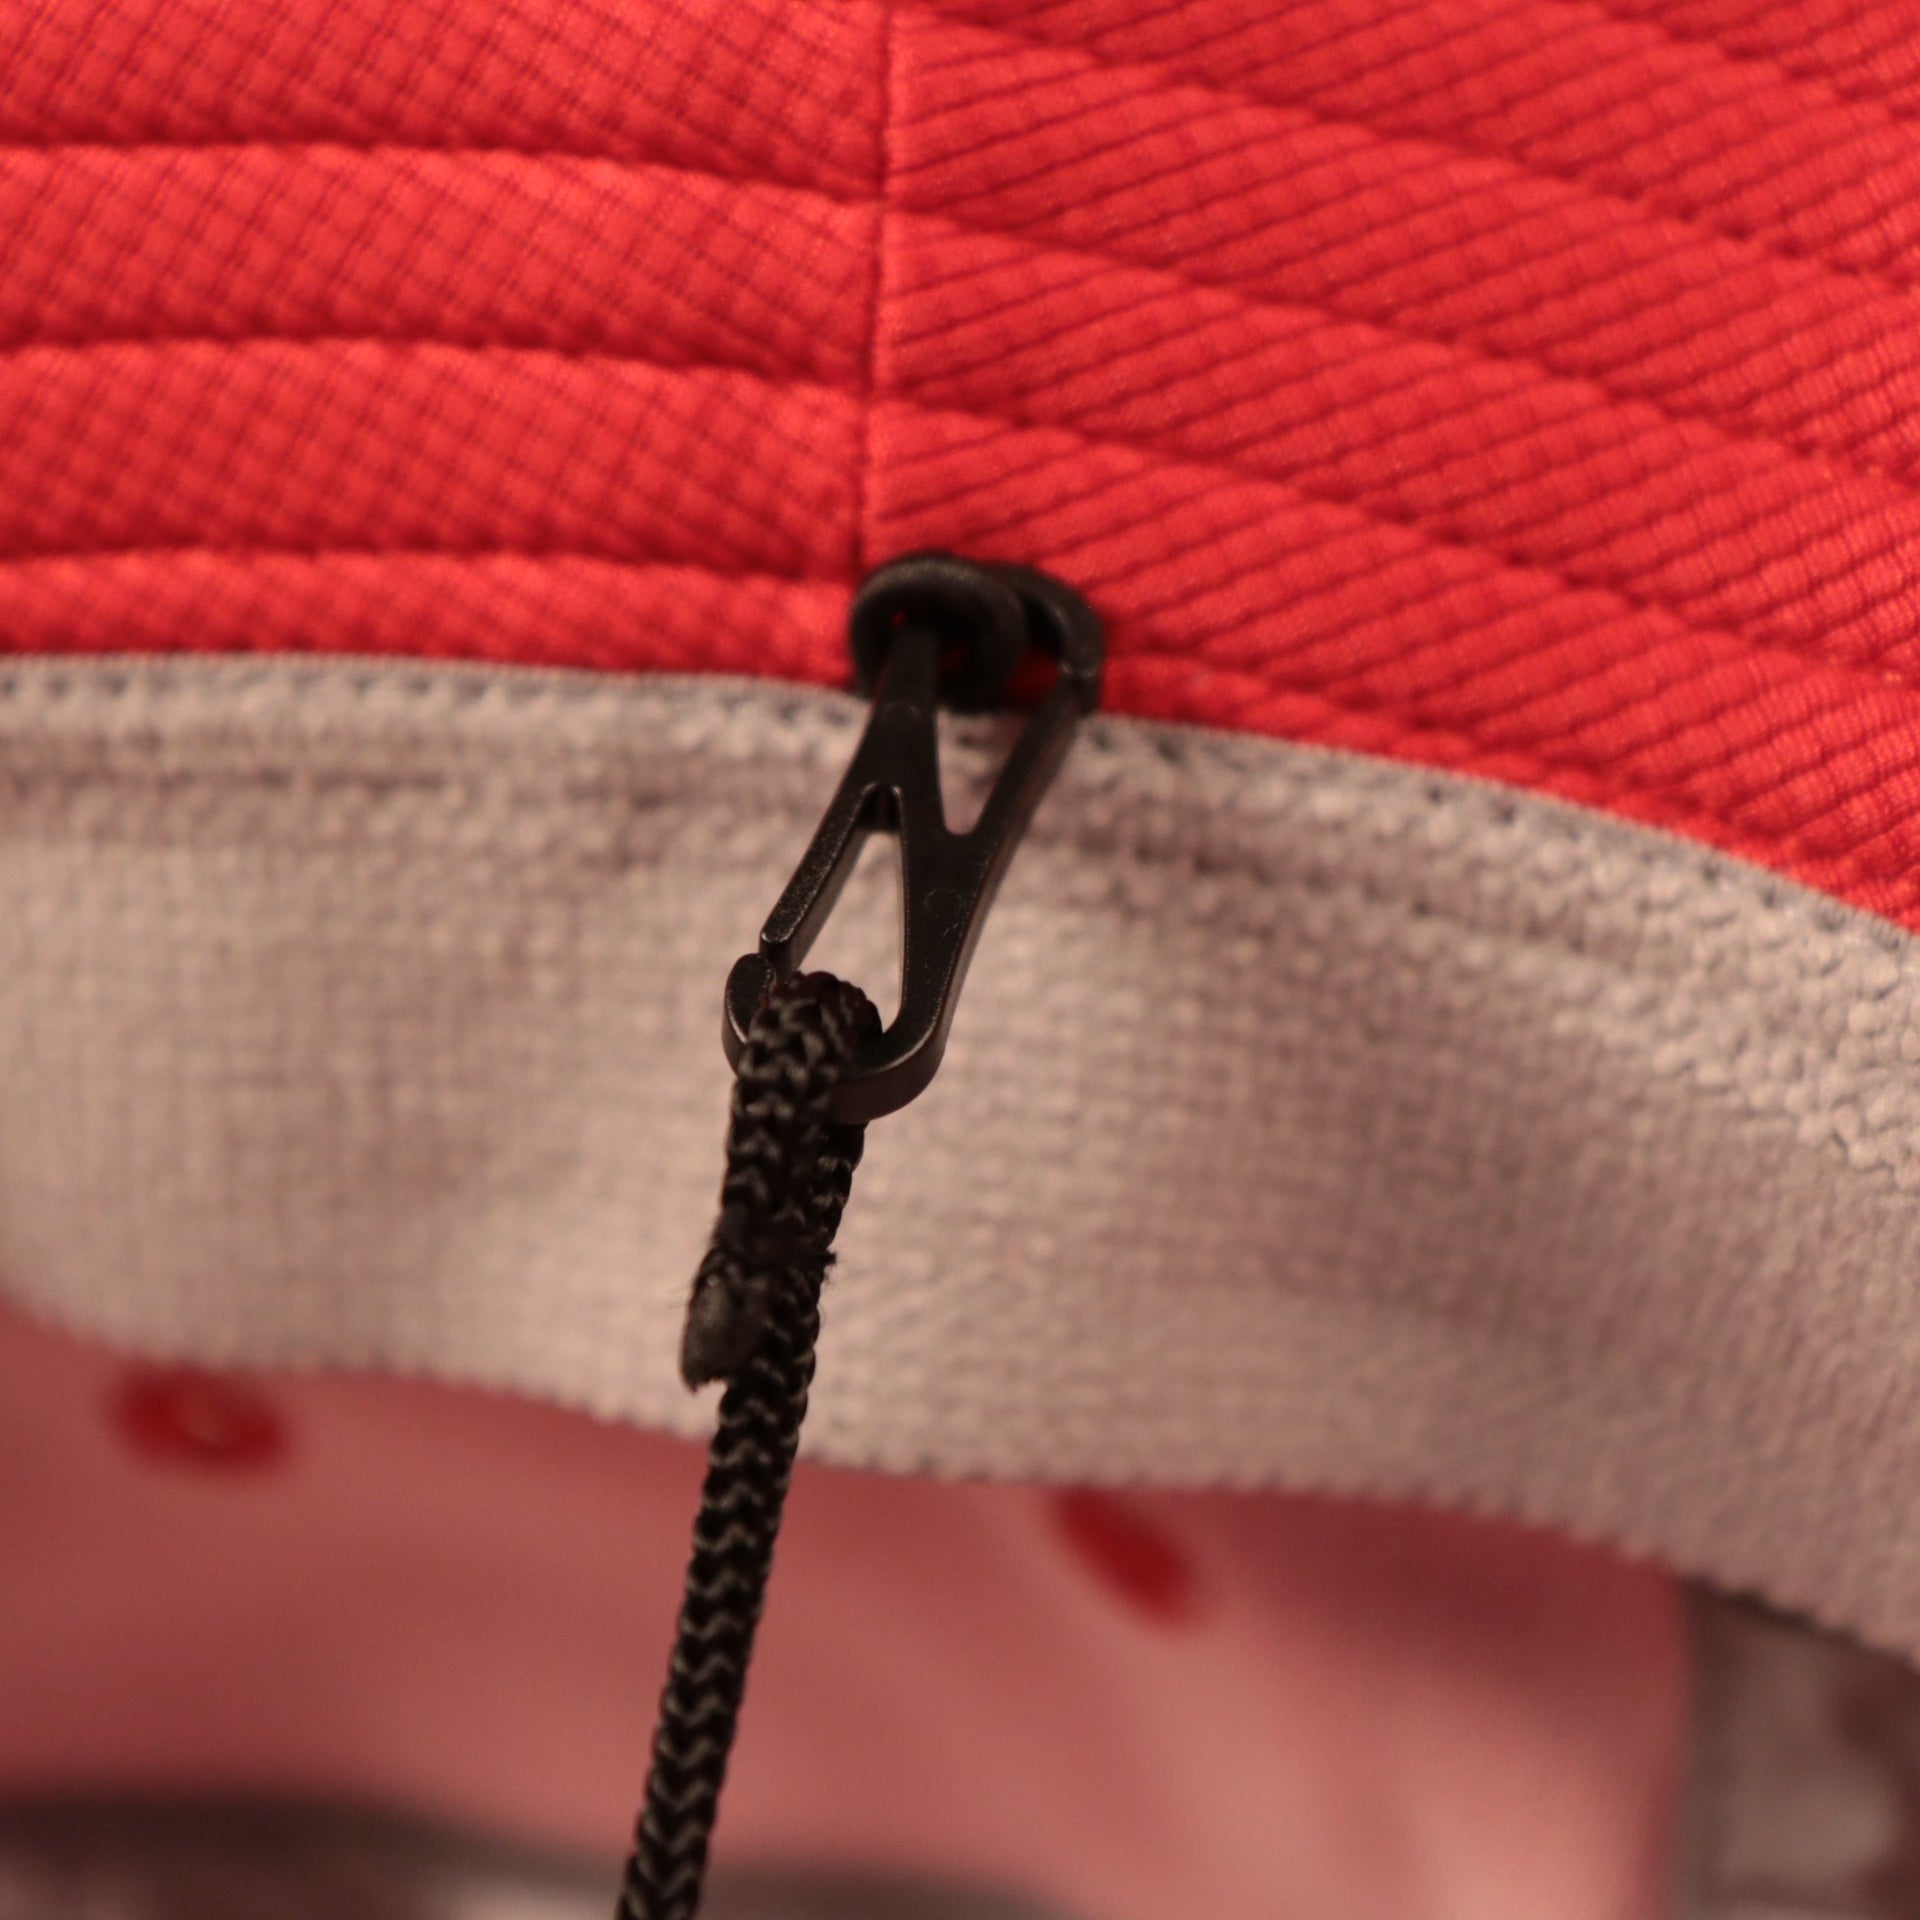 The black drawstrings of the red Houston Rockets fisherman hat by New Era.